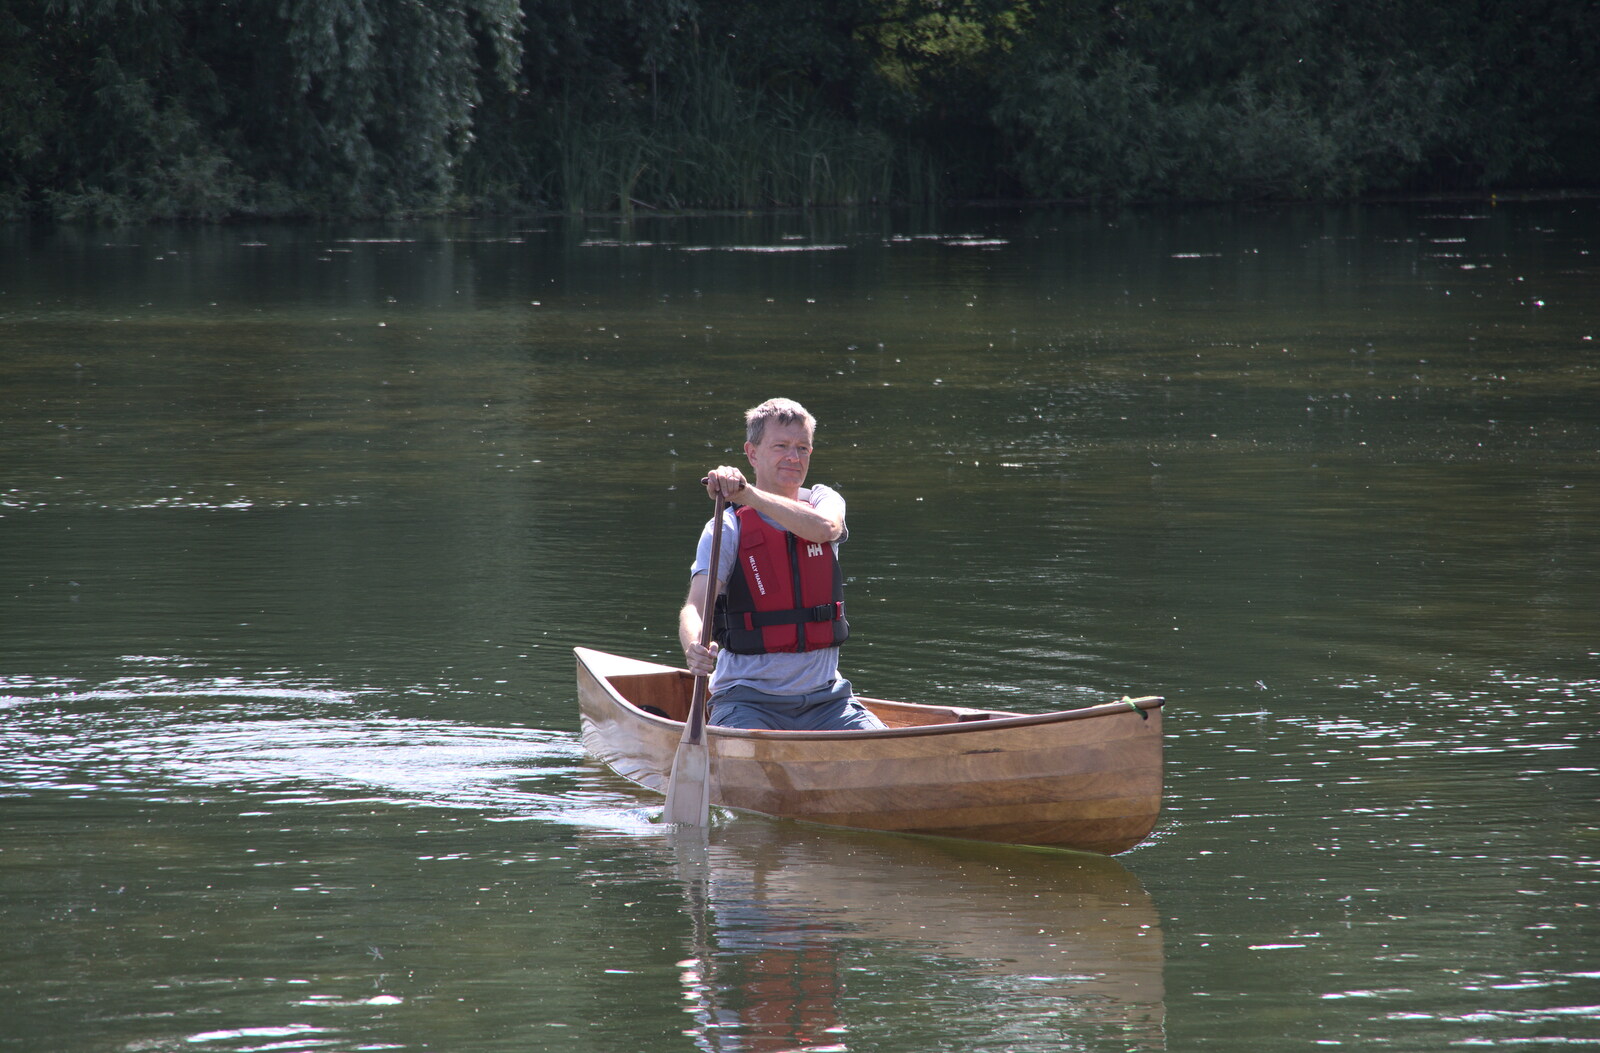 Nosher does some canoeing from Camping at the Lake, Weybread, Harleston - 25th June 2022